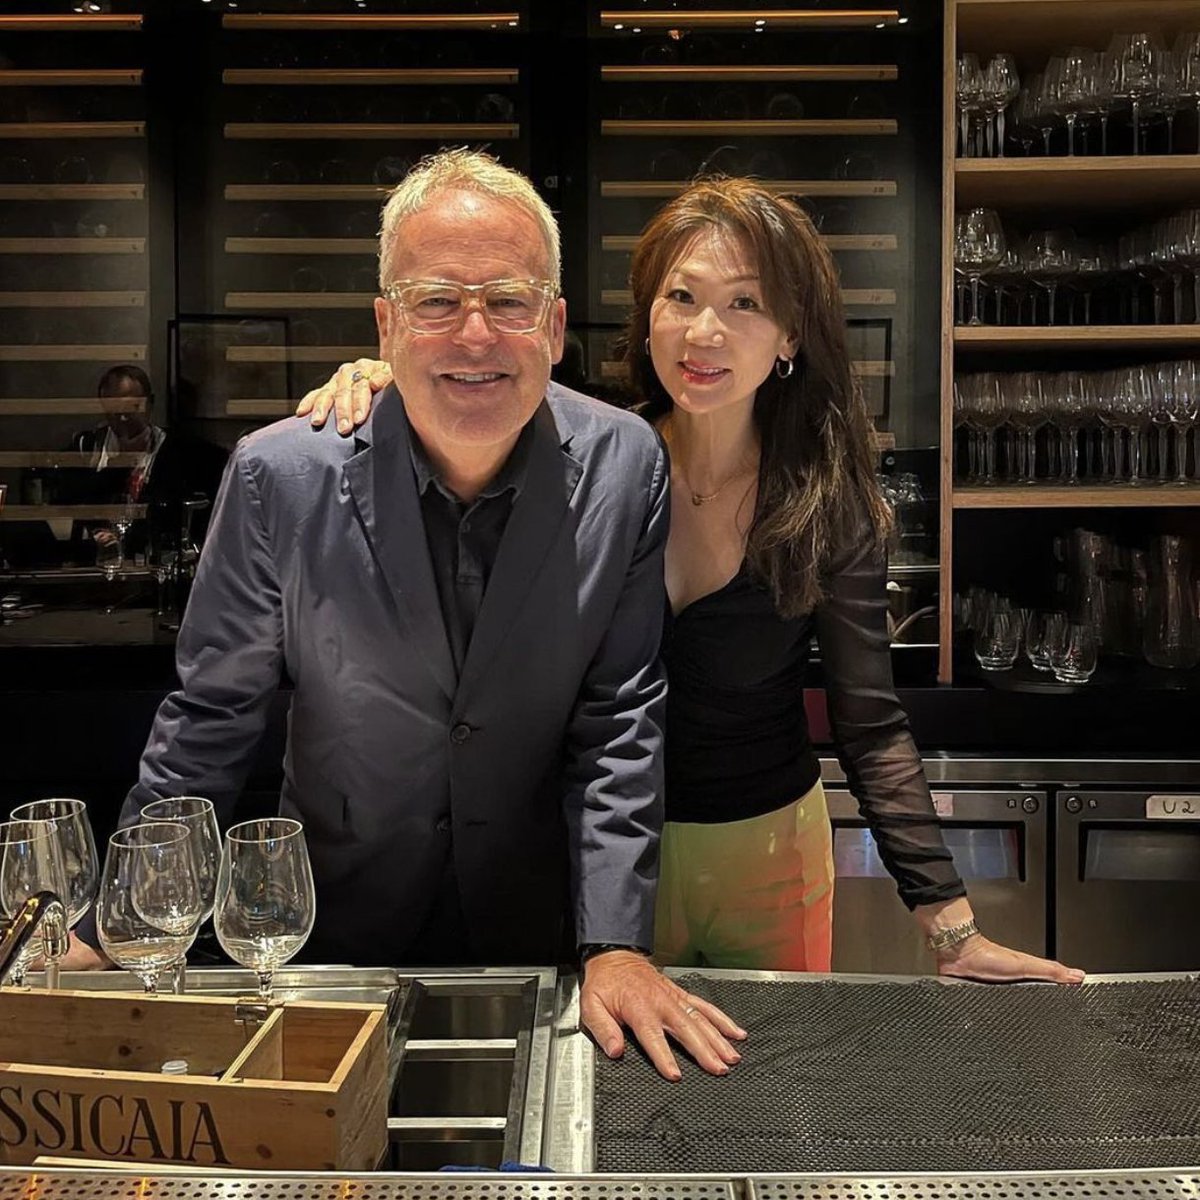 Repost from @jamessucklingwinecentral -James and Marie are finally back in Hong Kong and they are excited to be drinking and dining at James Suckling Wine Central. Come by this week and try to spot them! #jamessuckling #hongkong #wine #foodie #winebar